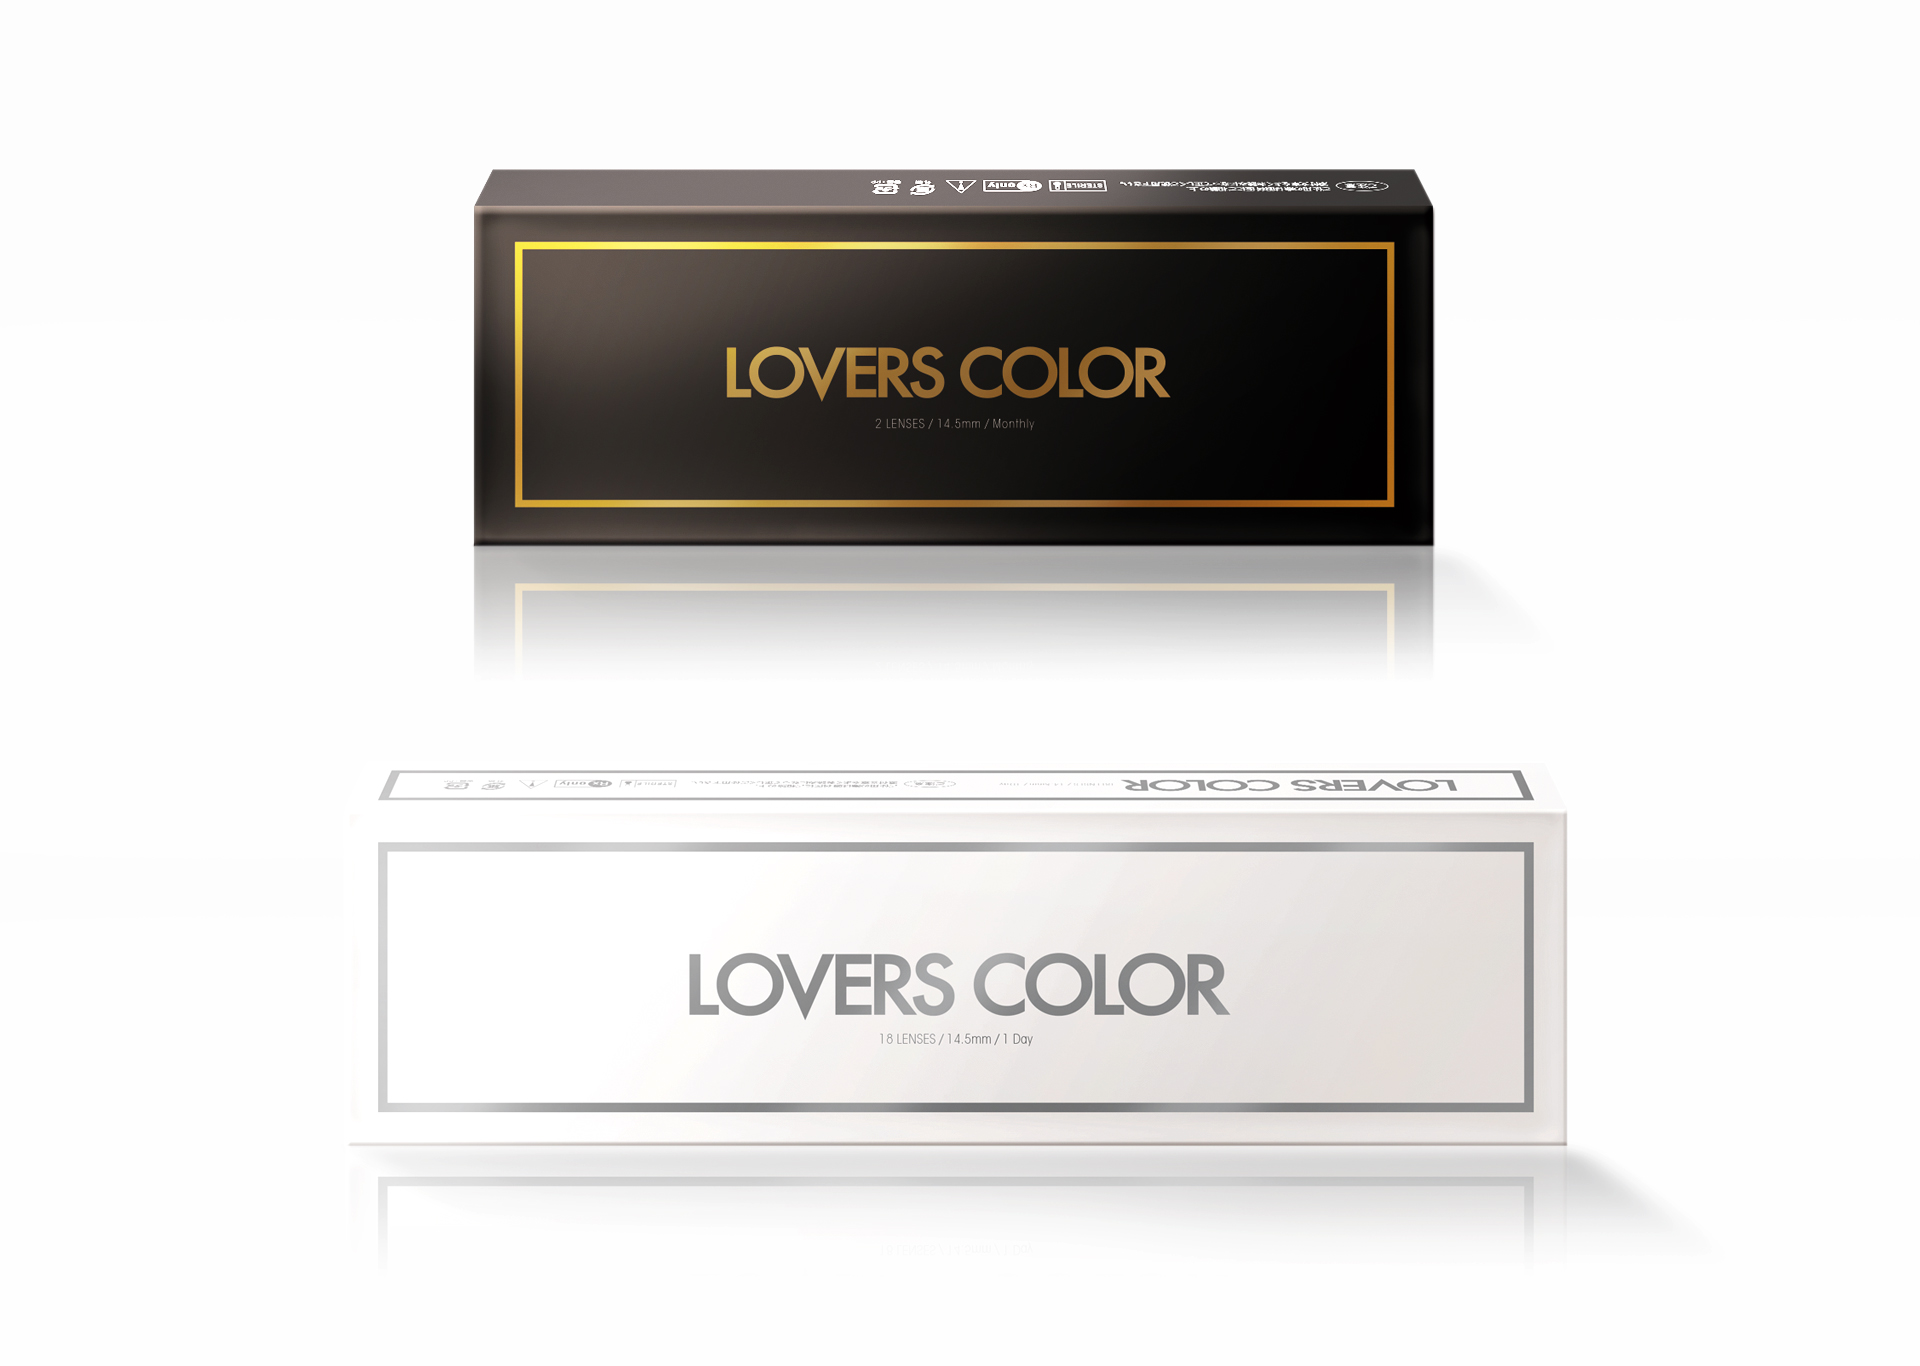 LOVERS COLOR CONTACT LENS